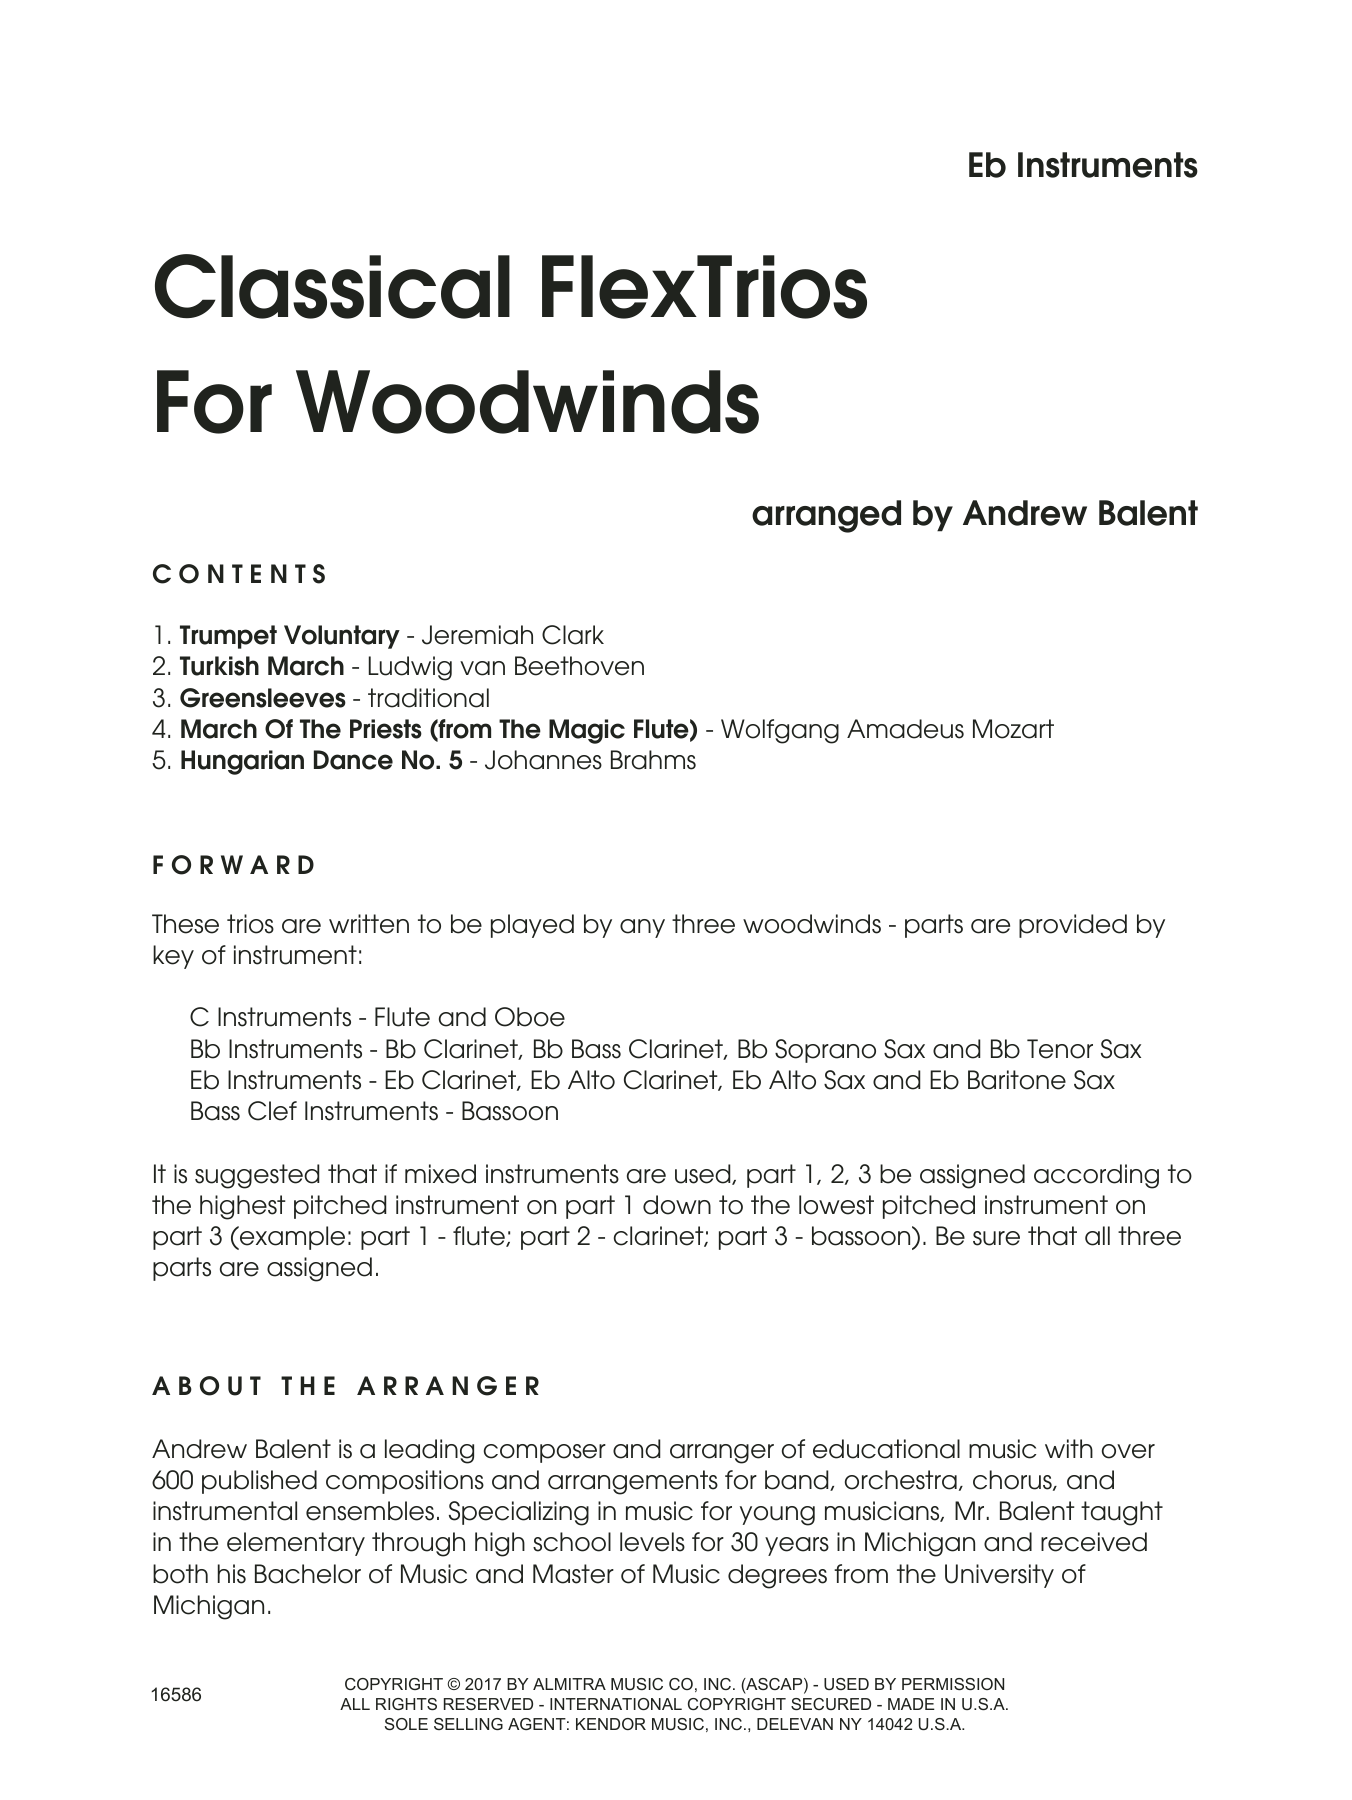 Download Andrew Balent Classical FlexTrios For Woodwinds - Eb Sheet Music